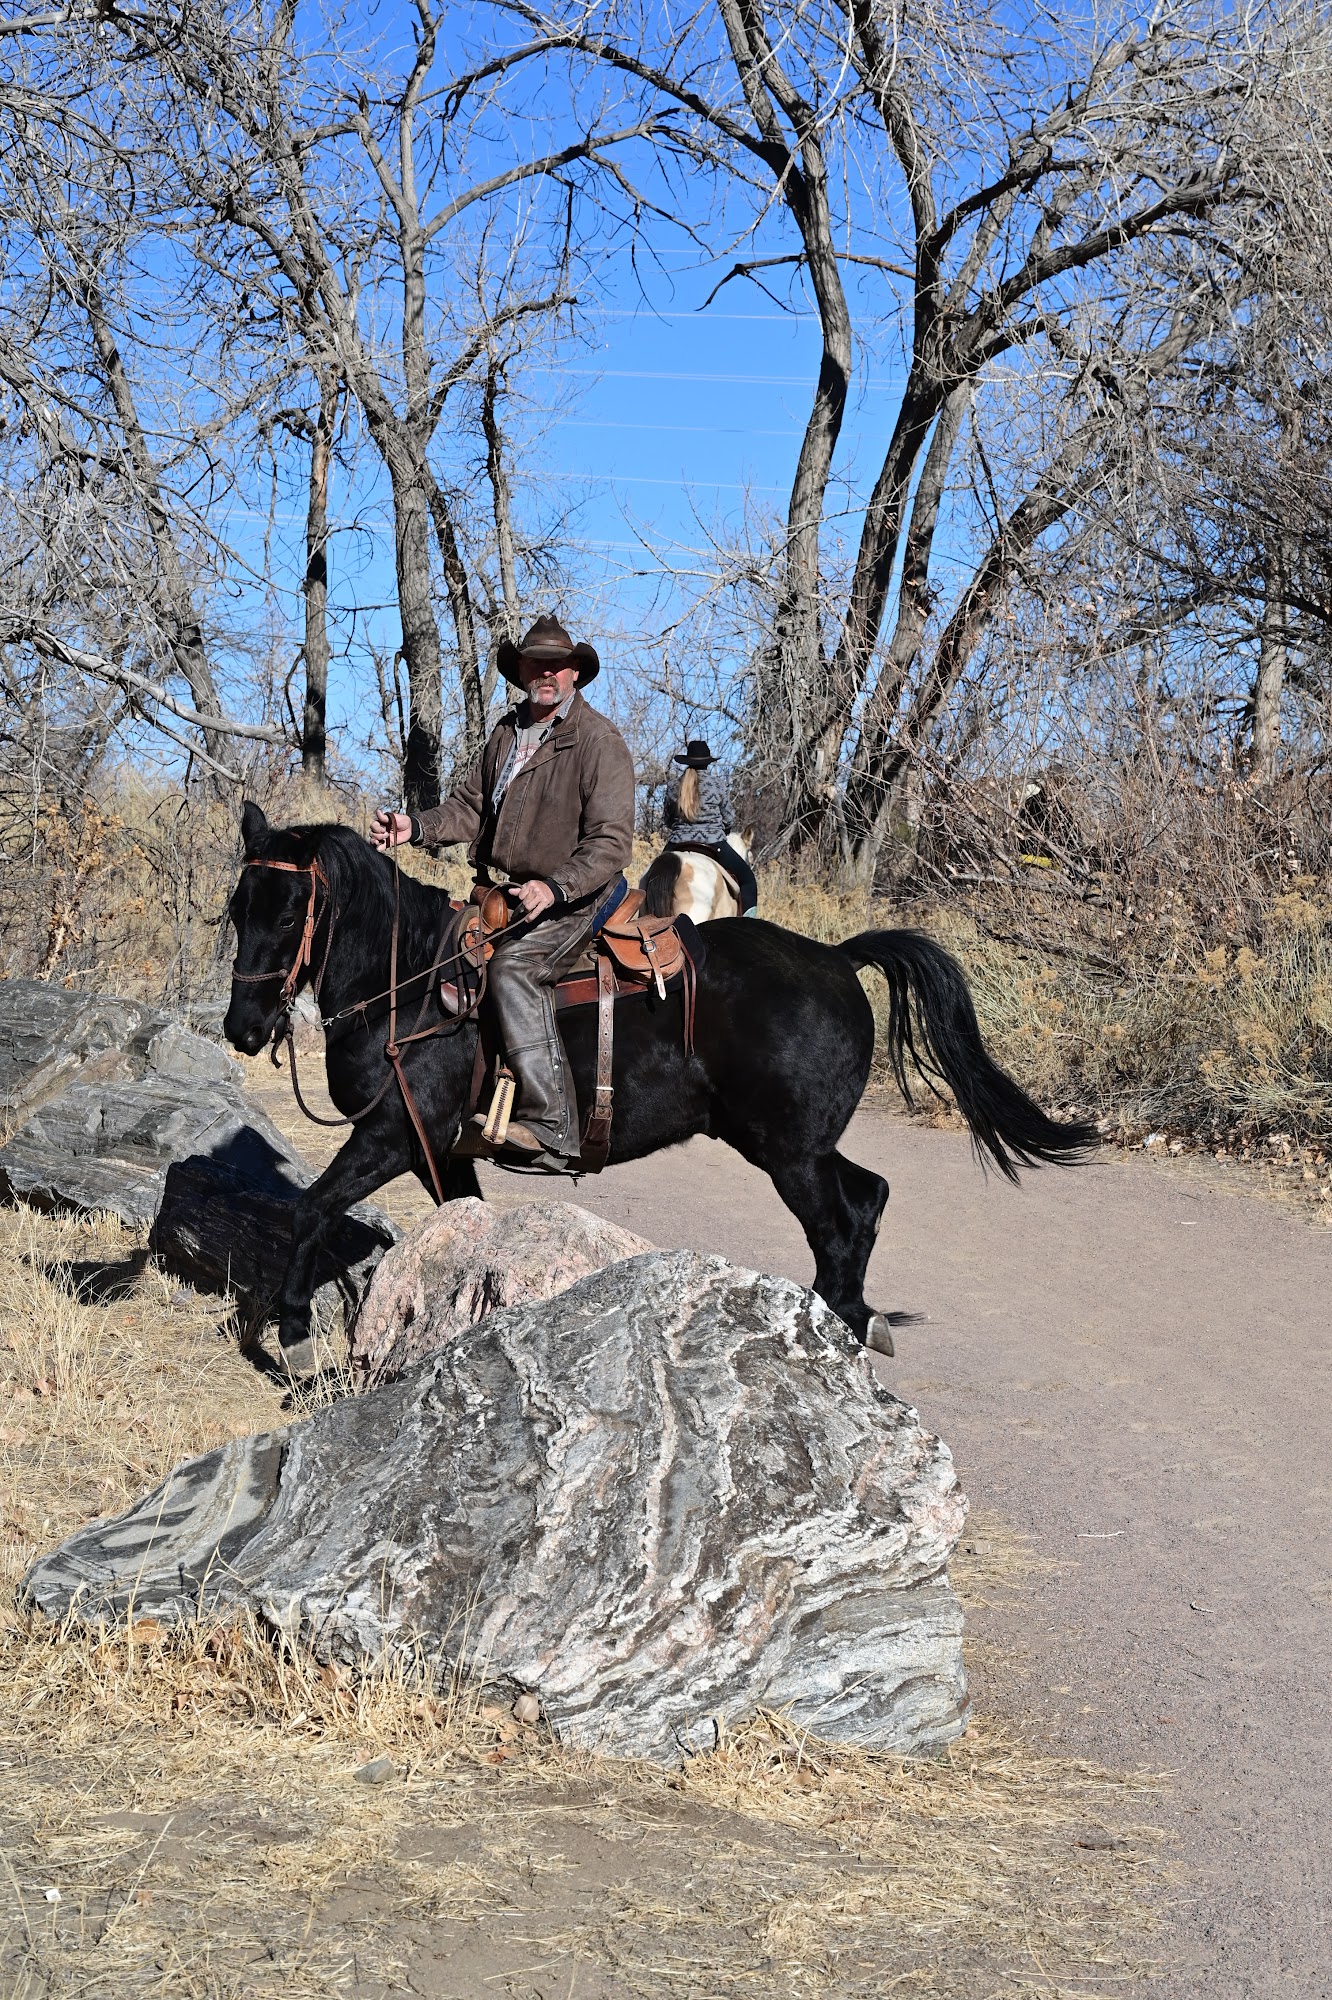 Telluride Horseback Adventures - Ride with Roudy 4019 County Rd 43Z S, Norwood Colorado 81423